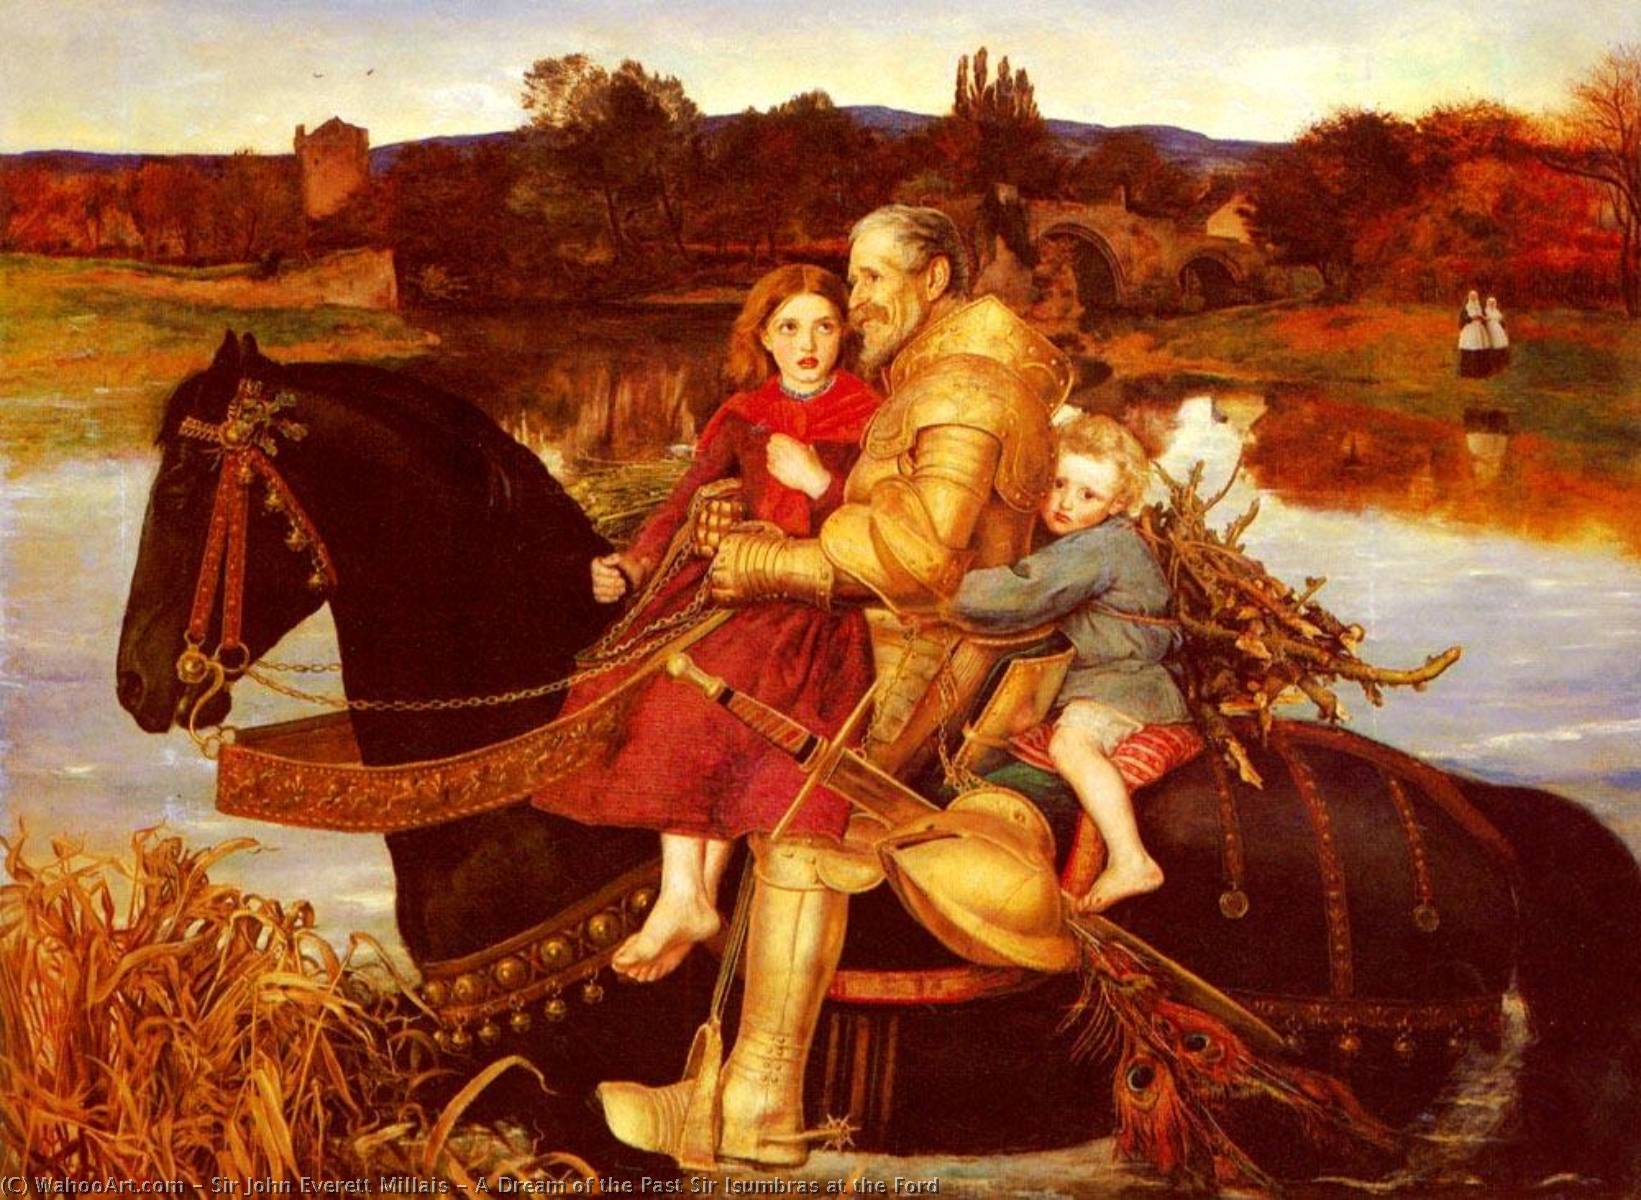 WikiOO.org - Encyclopedia of Fine Arts - Lukisan, Artwork John Everett Millais - A Dream of the Past Sir Isumbras at the Ford